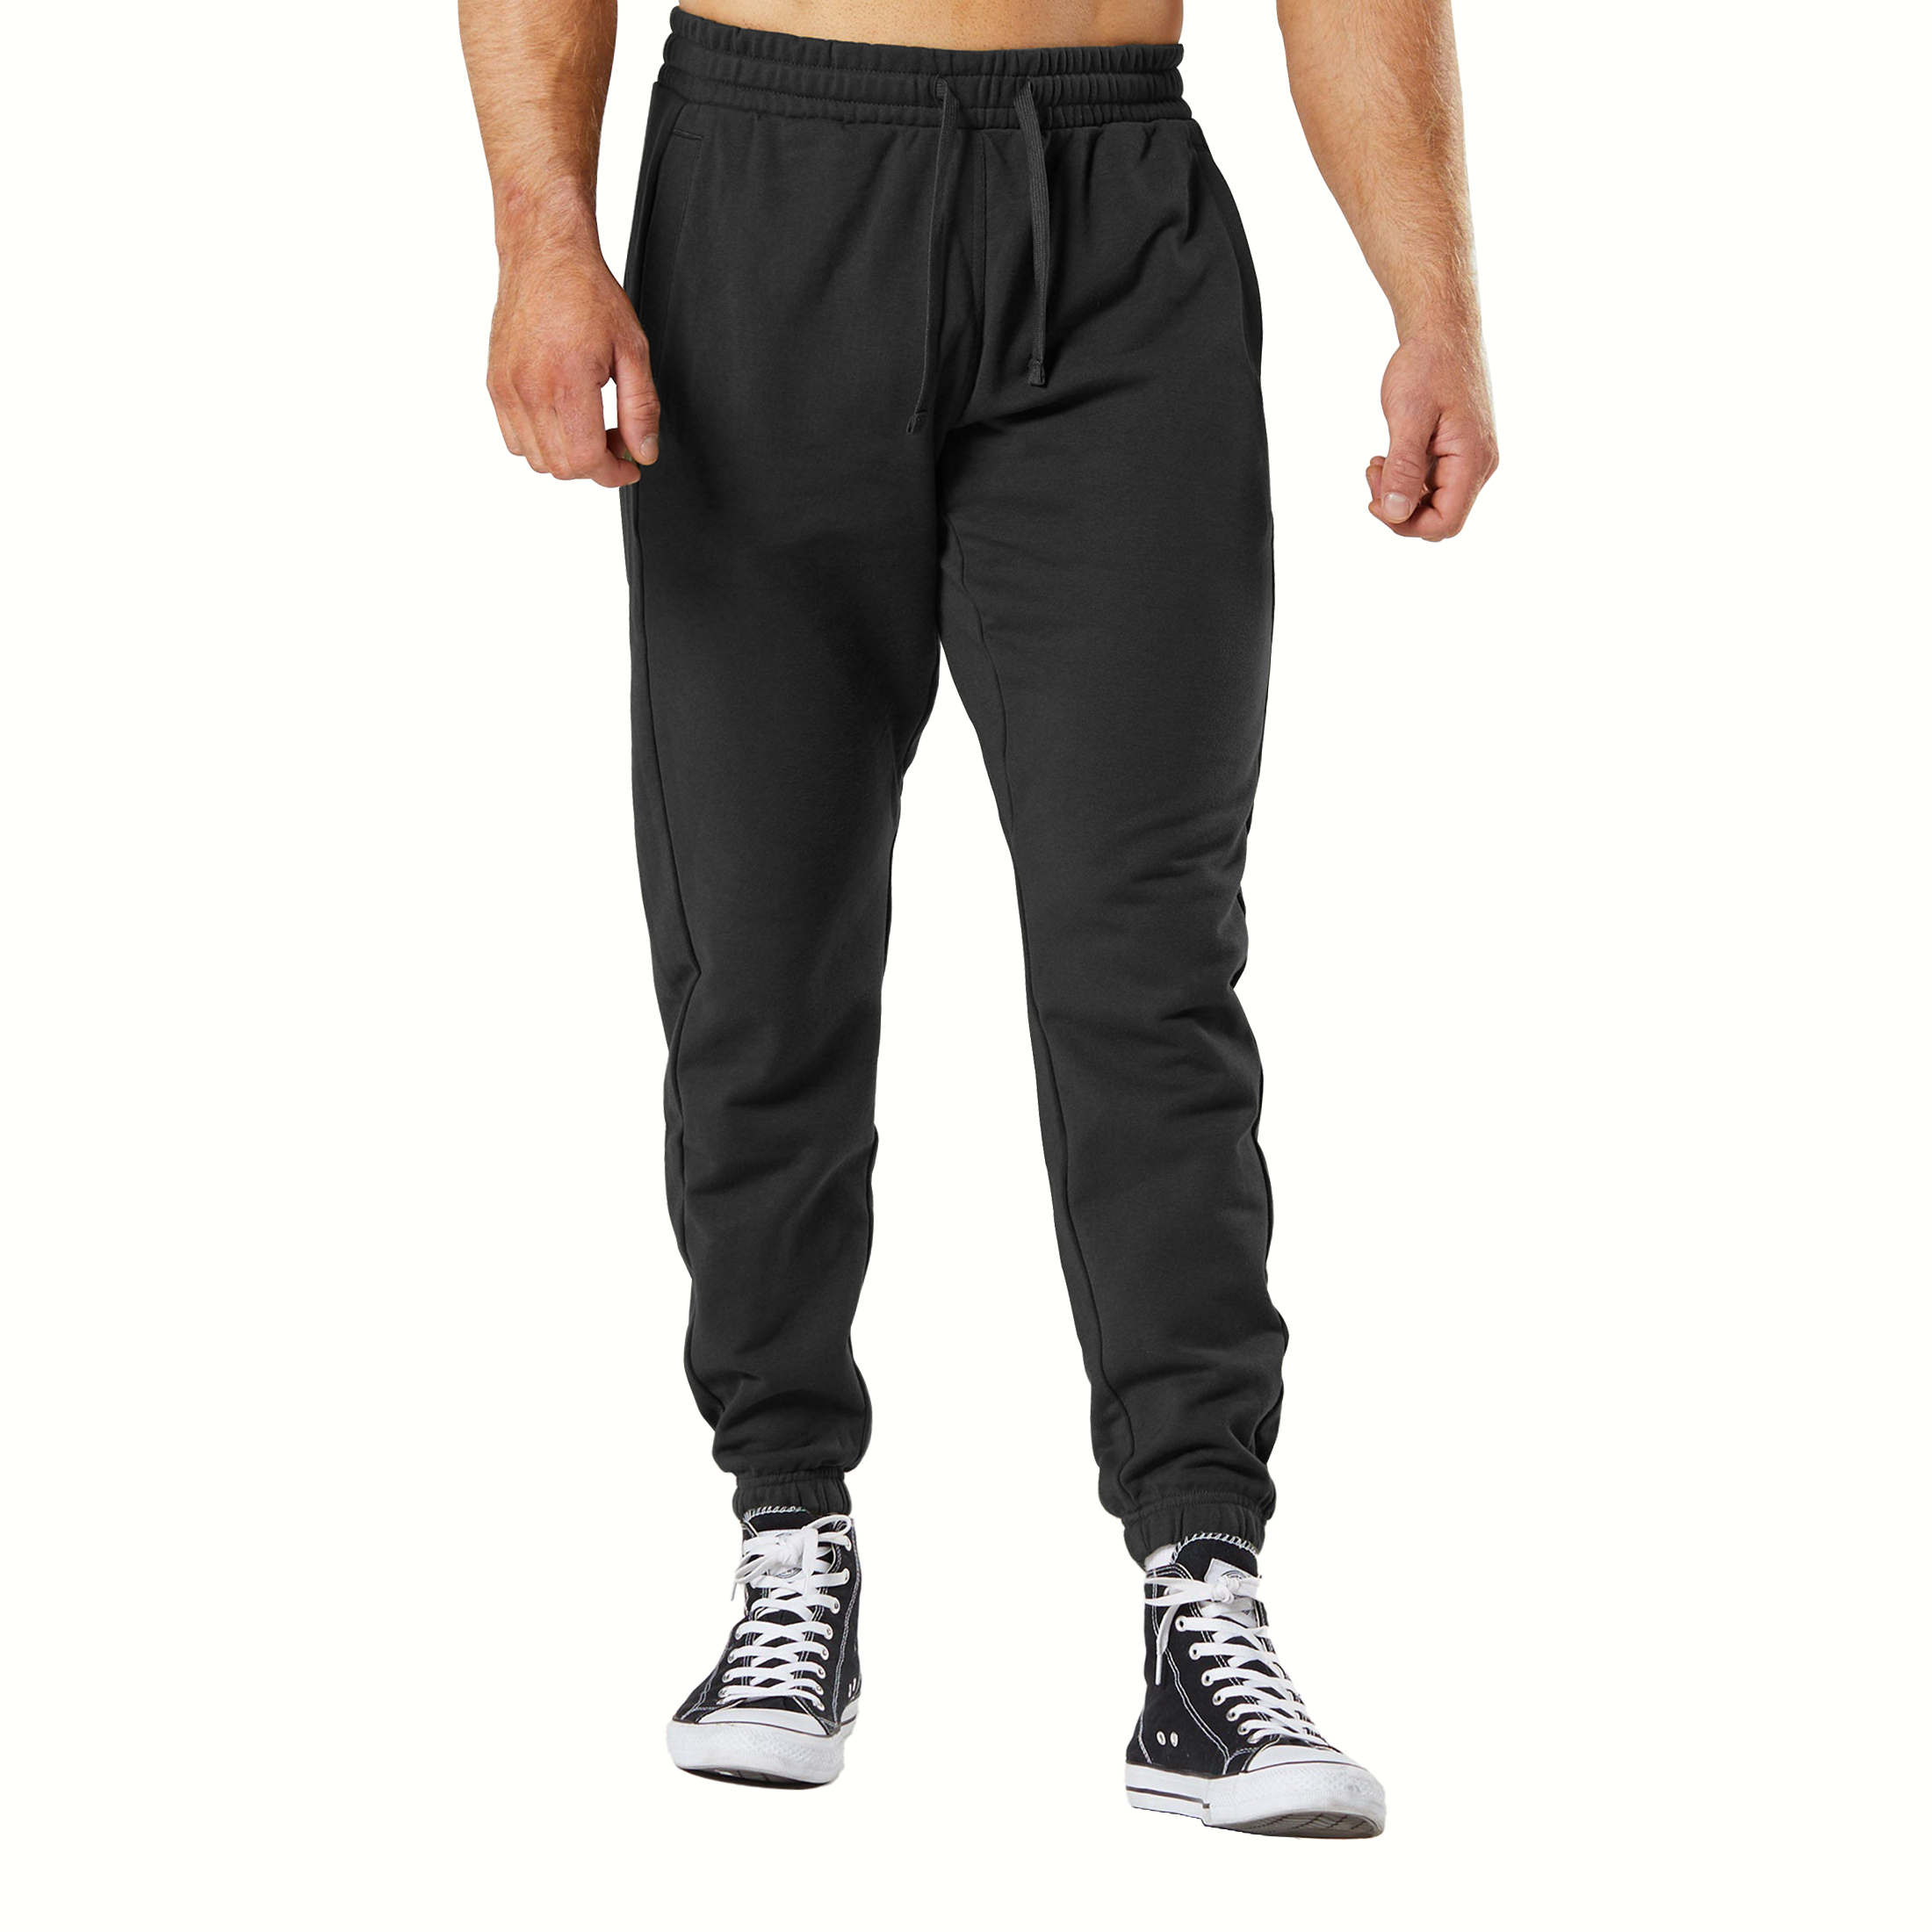 3-Pack: Men's Casual Fleece-Lined Elastic Bottom Sweatpants Jogger Pants With Pockets - Solid & Stripes, Small